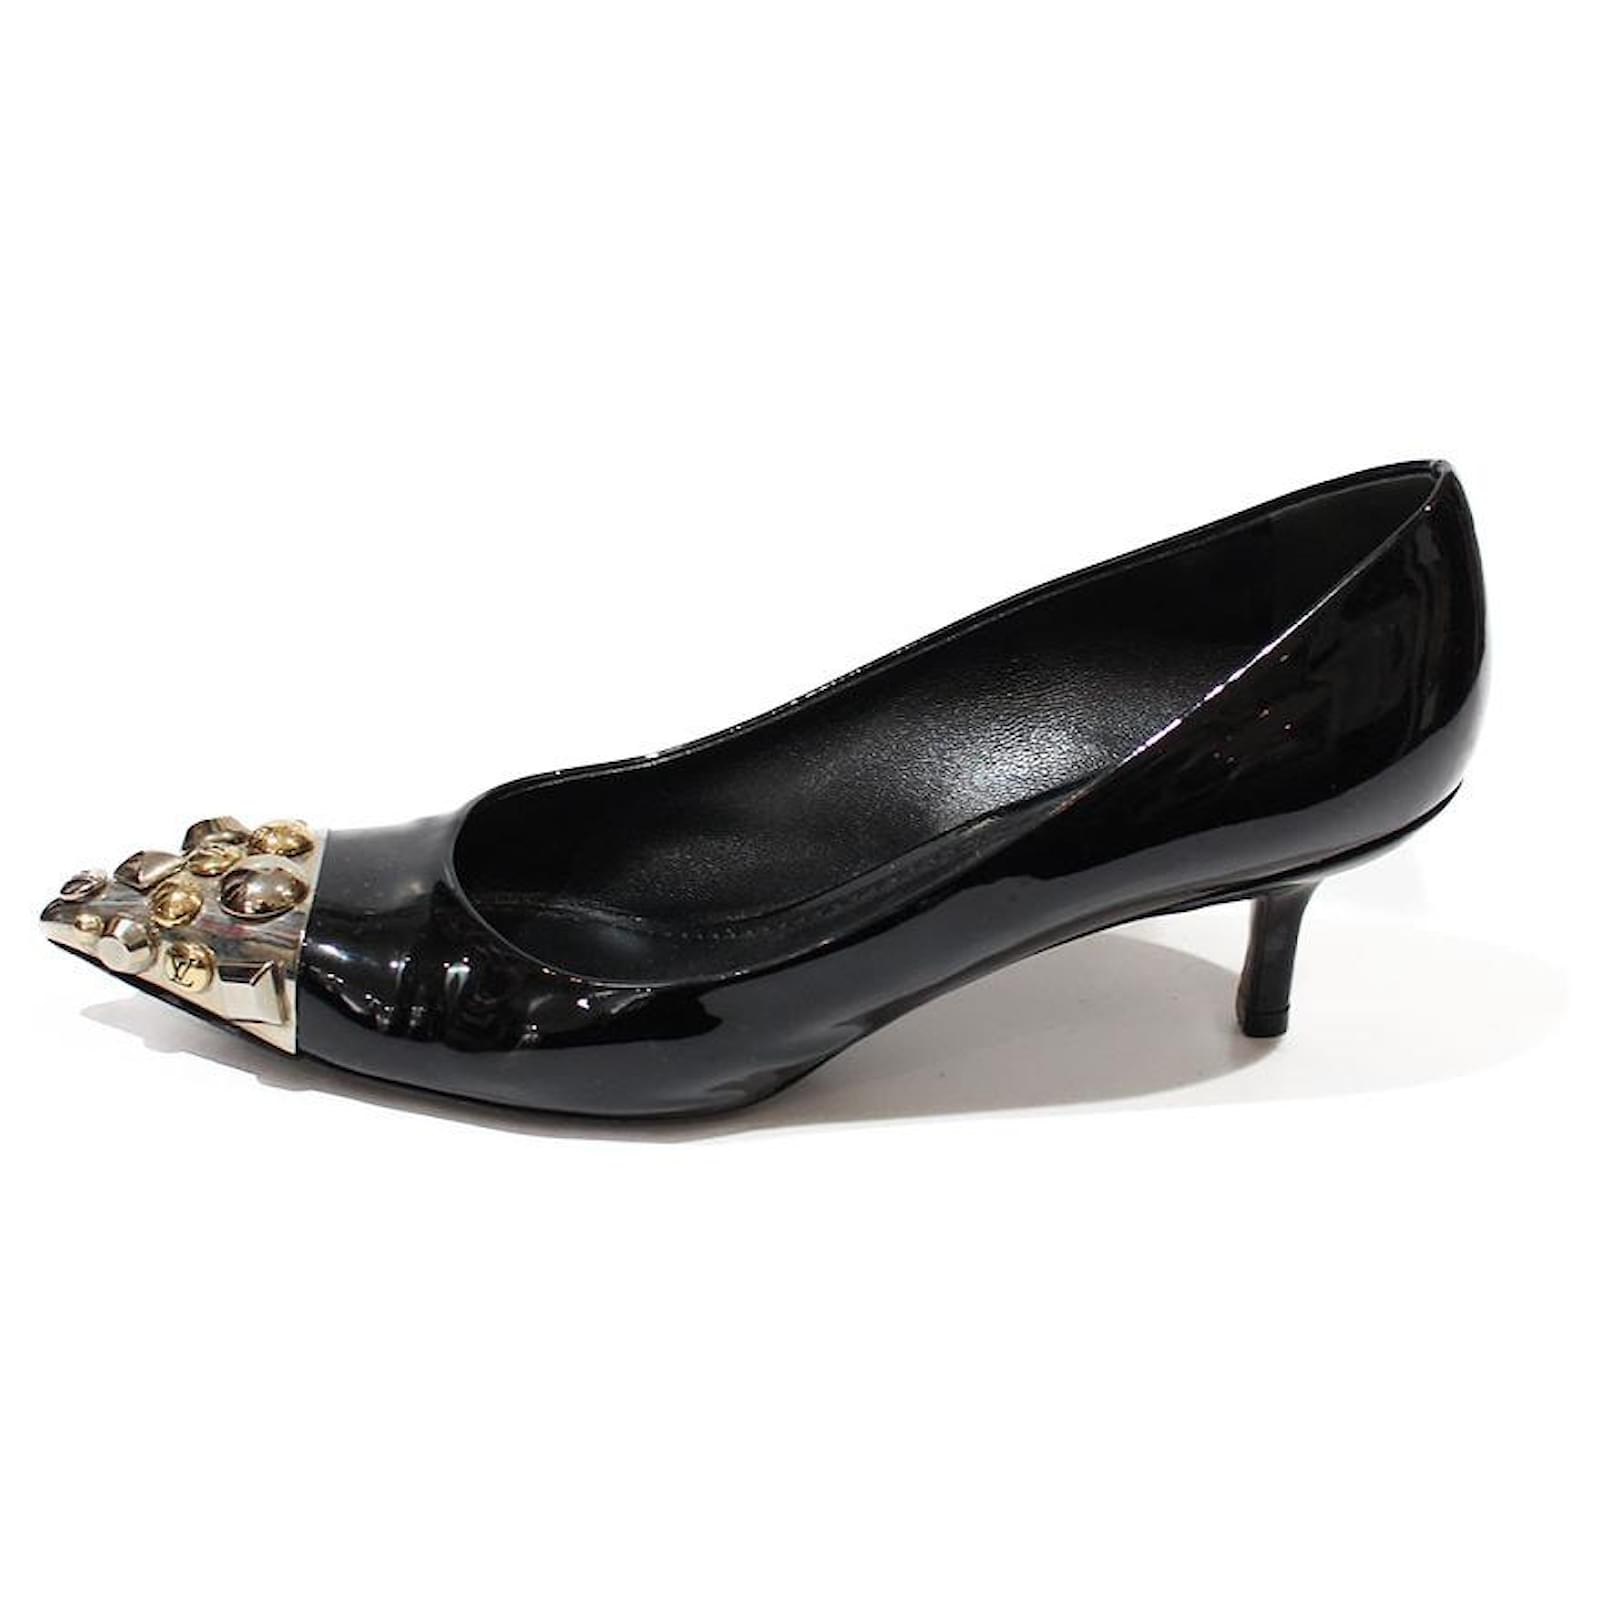 LOUIS VUITTON MID HIGH HEEL PUMPS IN BLACK PATENT LEATHER WITH